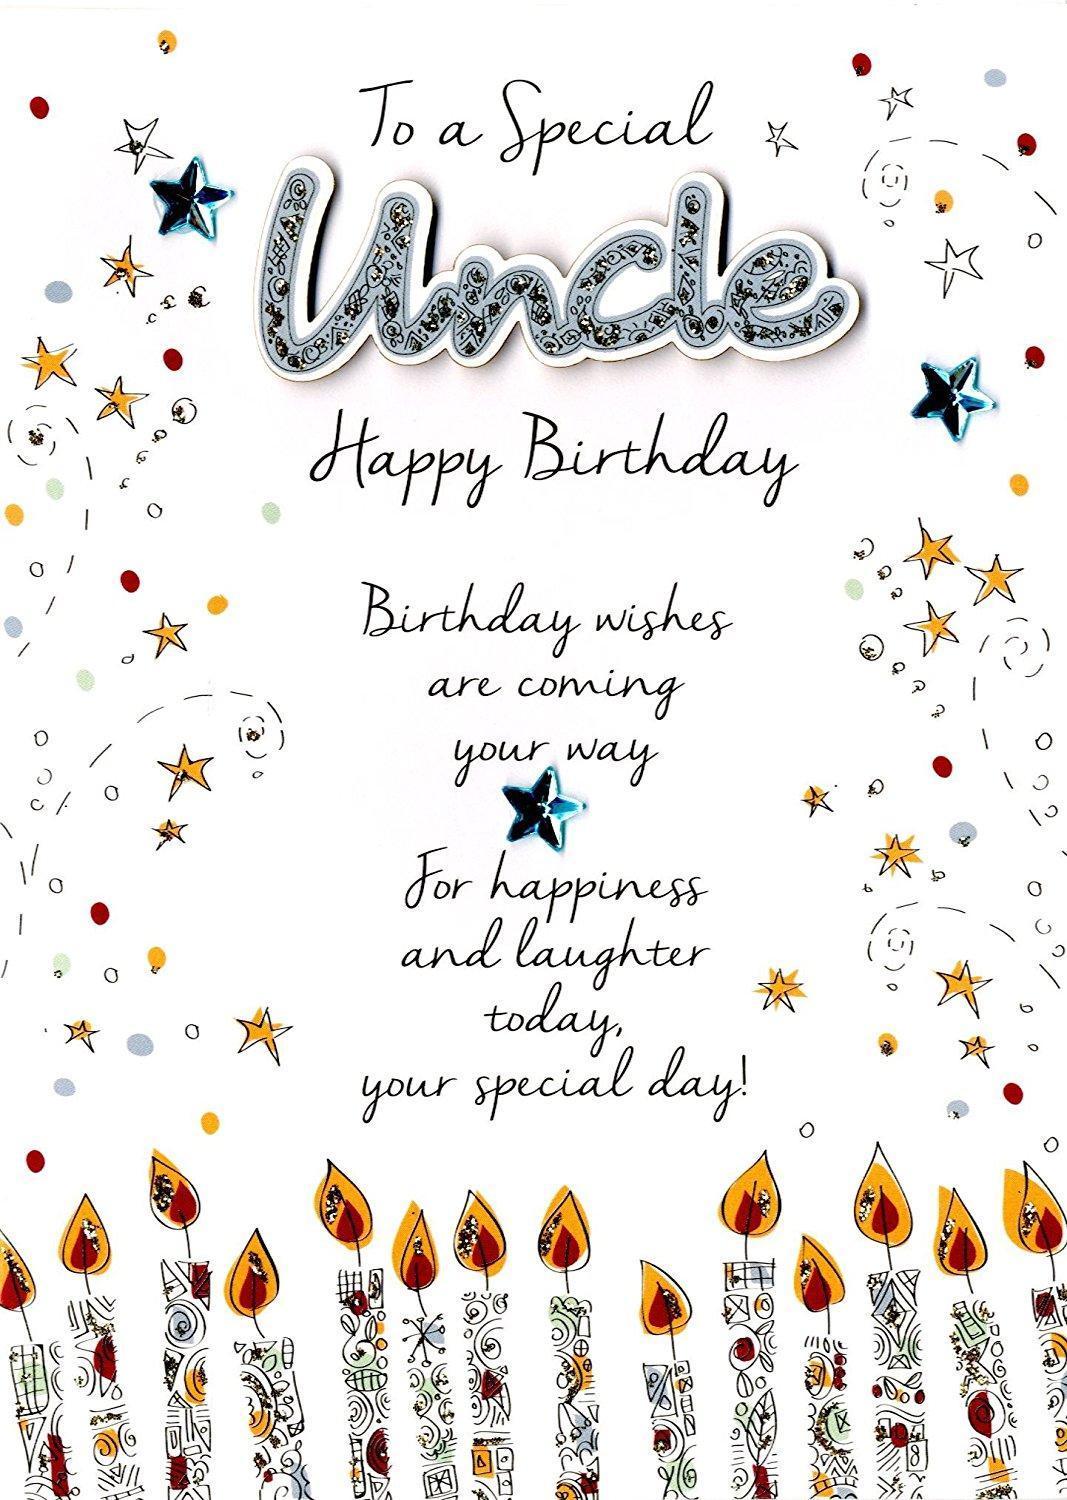 Special Uncle Birthday Greeting Card Second Nature Just To Say Cards